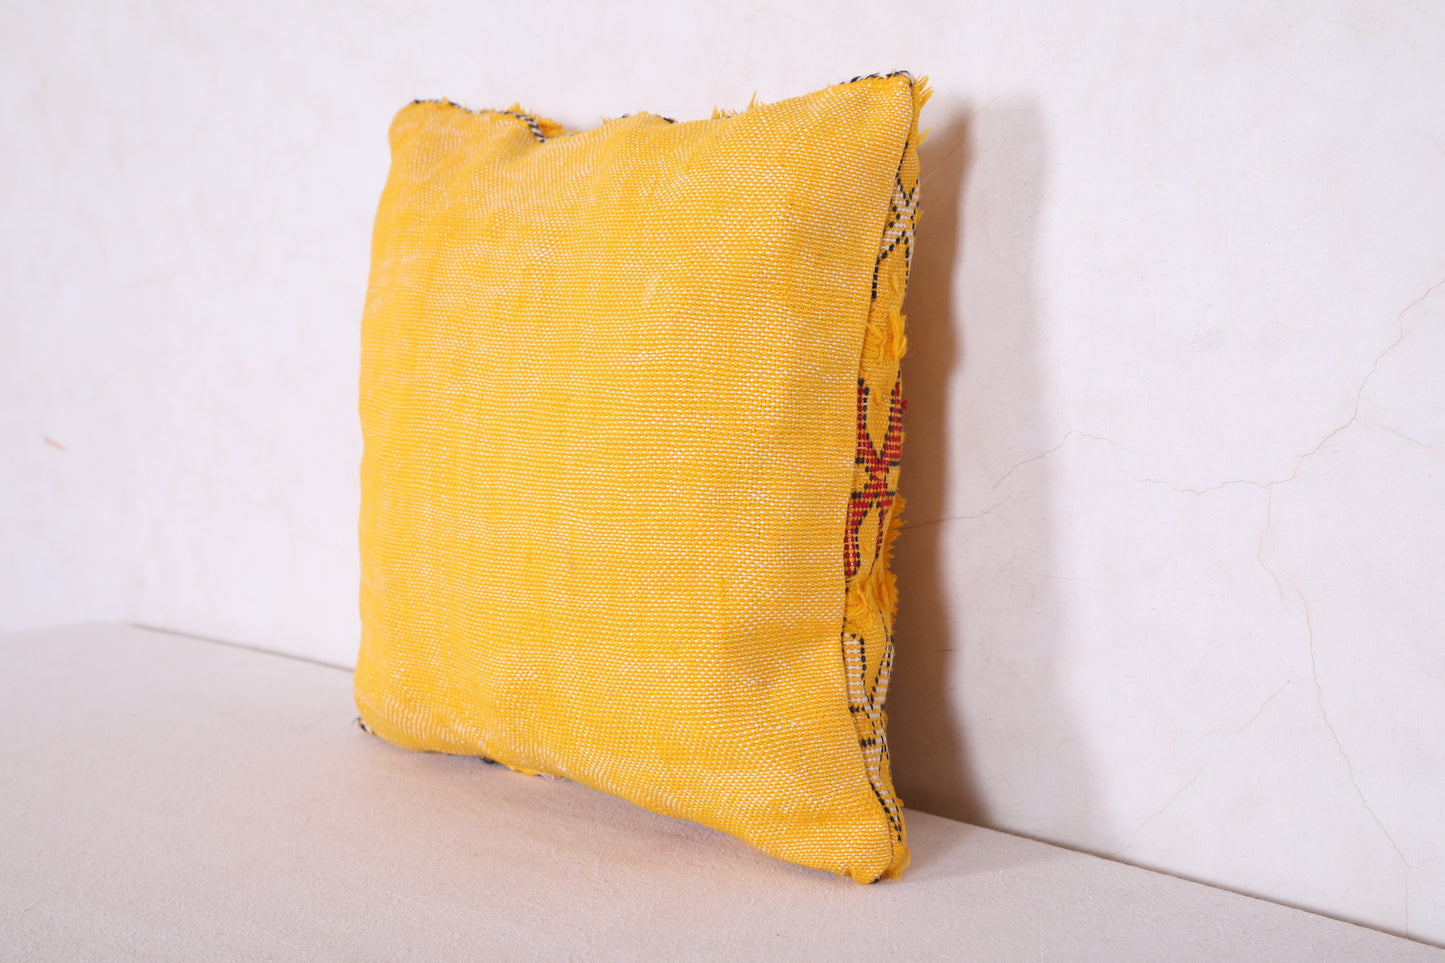 Berber Pillow Yellow 14.1 INCHES X 14.5 INCHES